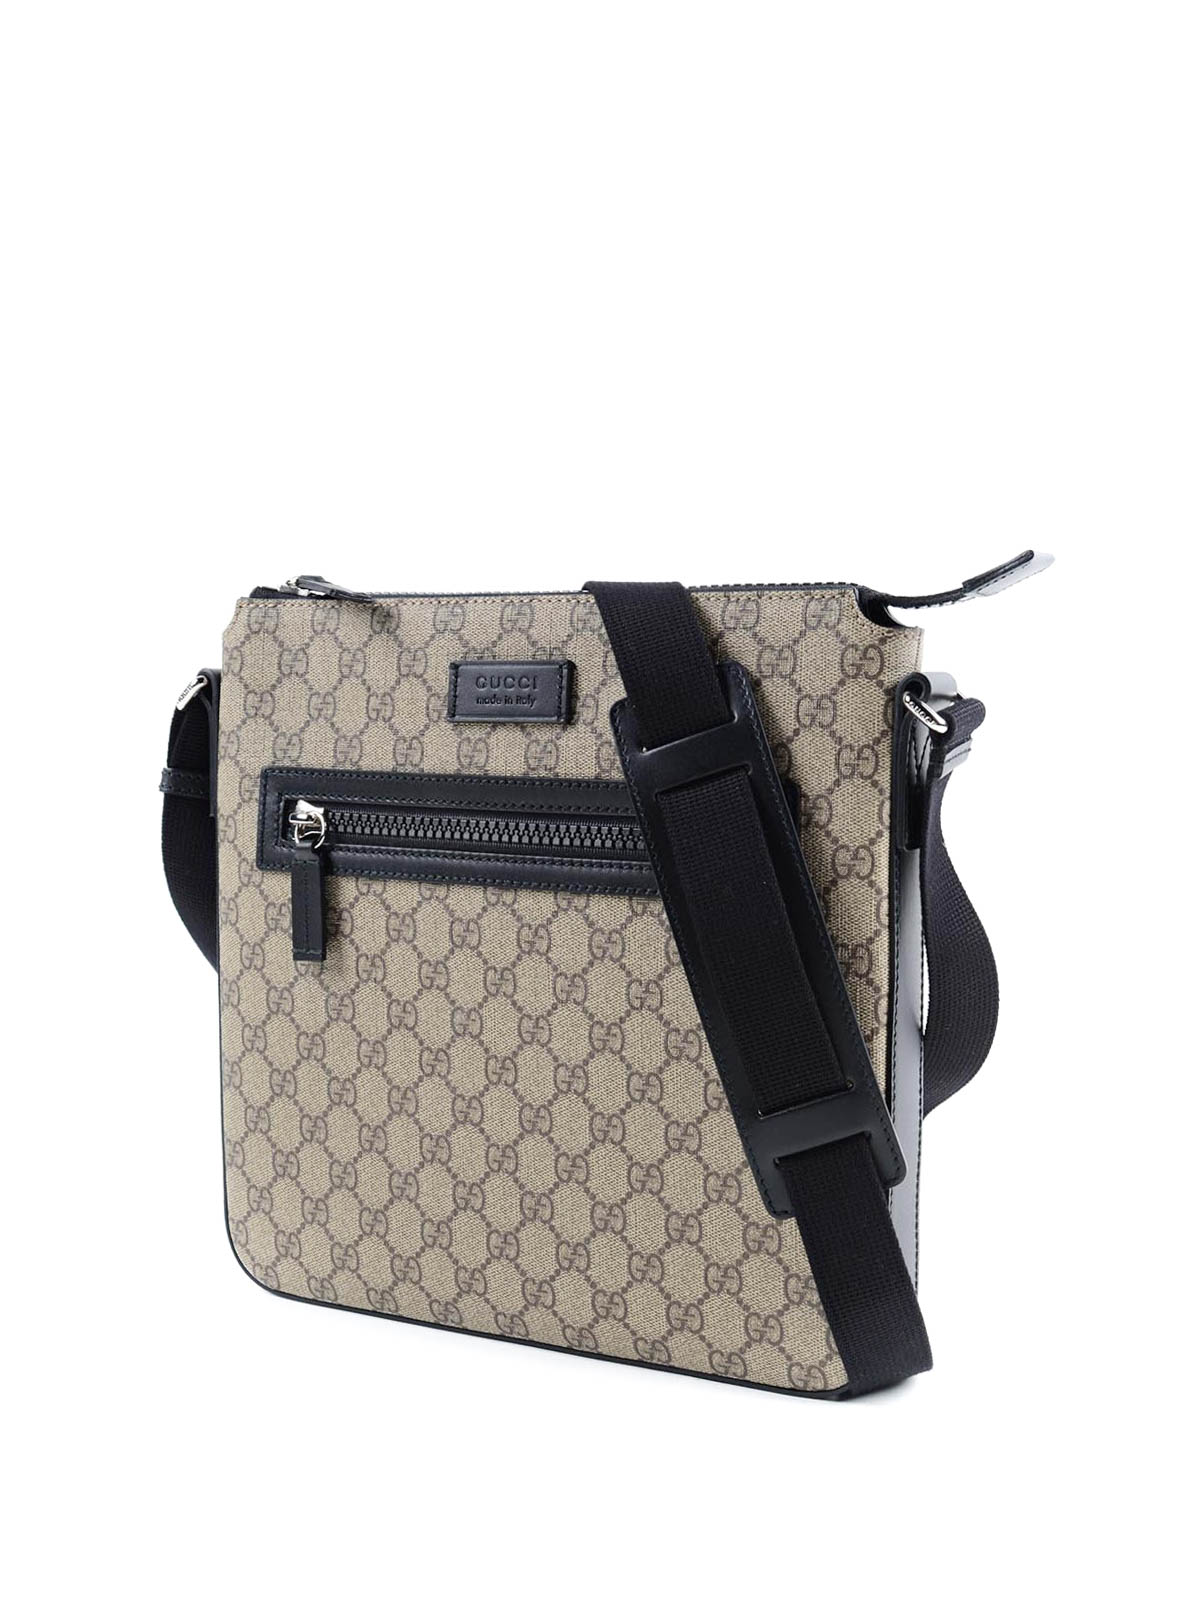 GG Supreme crossbody by Gucci - cross body bags | Shop online at www.waterandnature.org